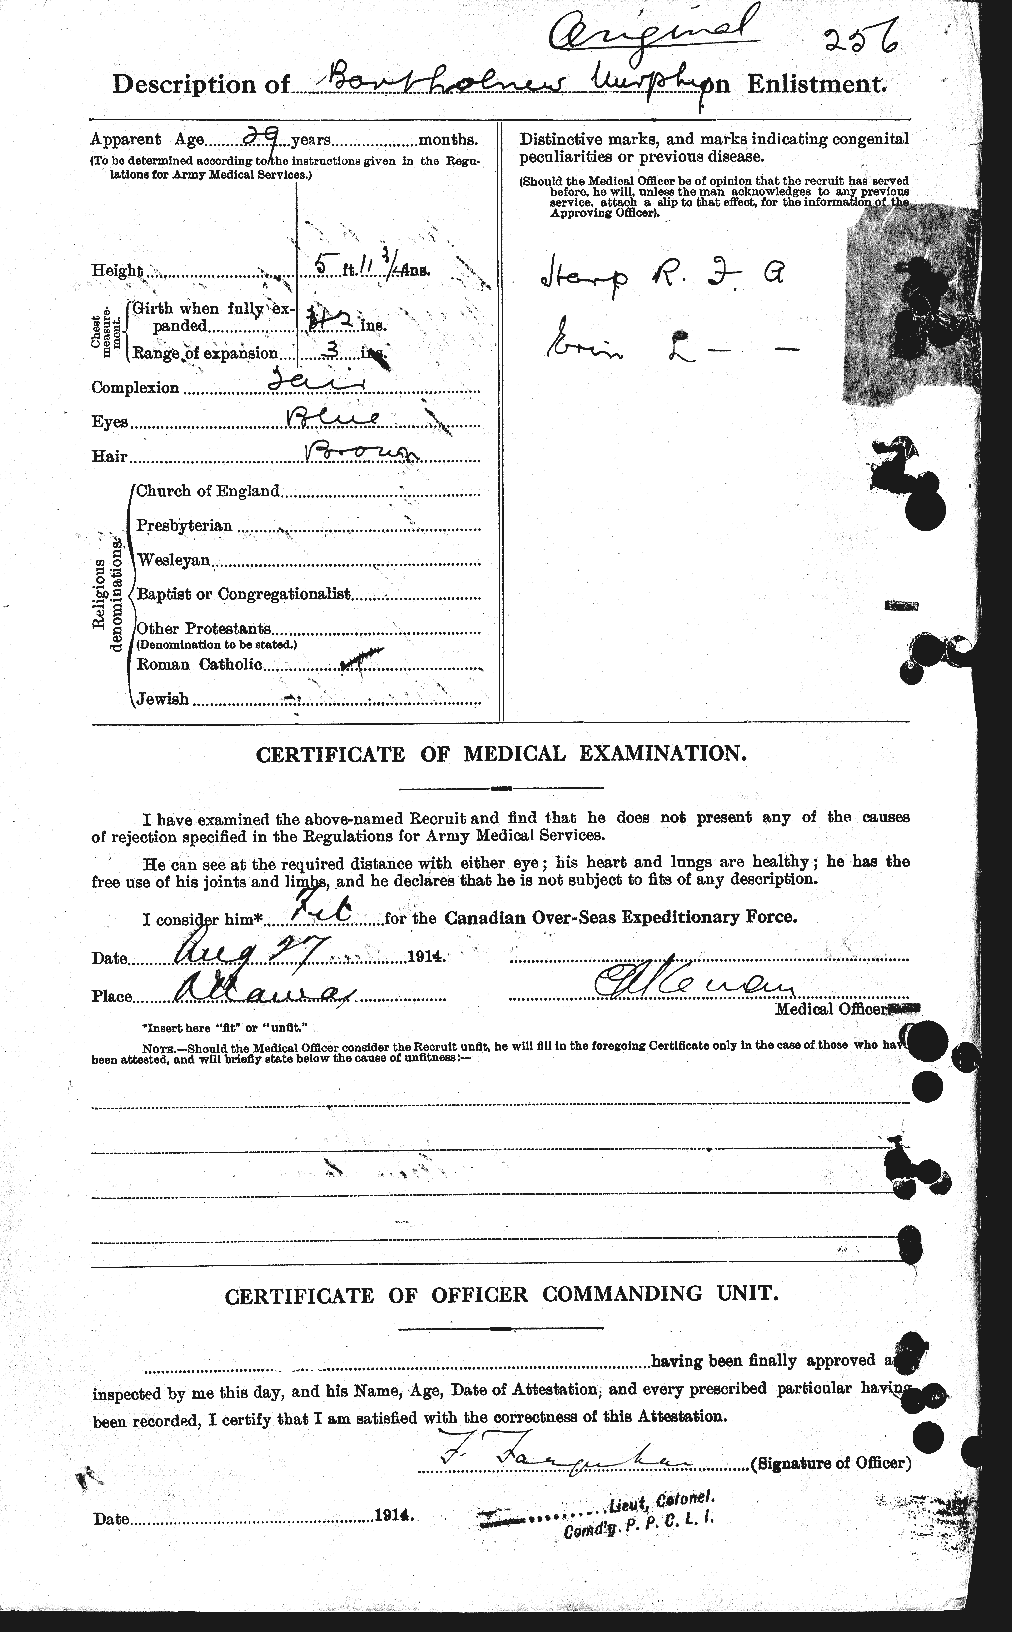 Personnel Records of the First World War - CEF 512686b